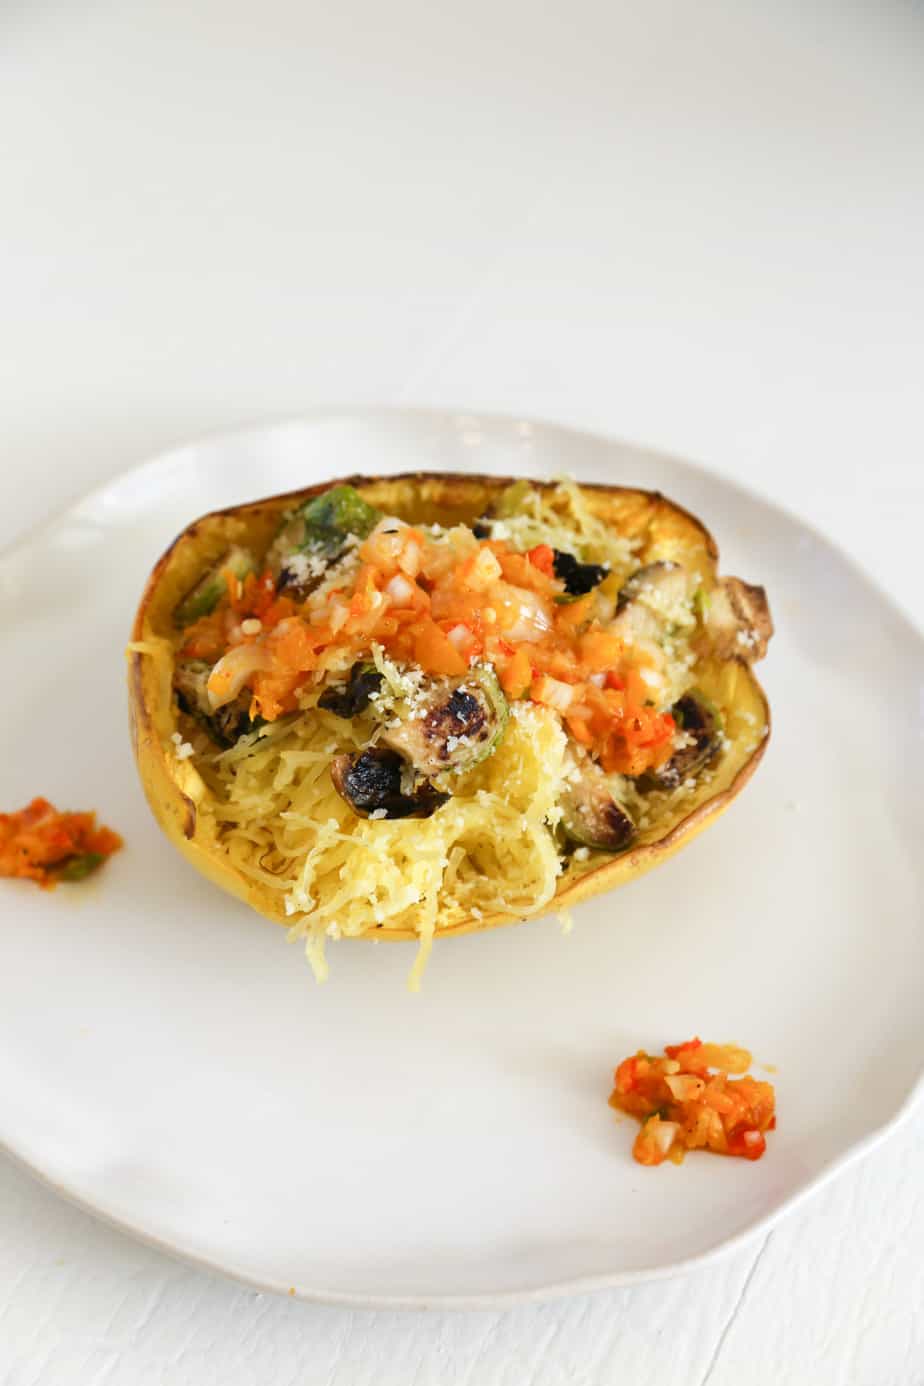 This Vegetarian Stuffed Spaghetti Squash is loaded with veggies and cheese so it tastes like a healthier vegetable pasta. Yet it's low carb, gluten free and YES it can be made vegan. You can enjoy this healthy stuffed spaghetti squash for lunch or dinner if you're on a low carb diet or looking for low carb recipes for a Keto diet."